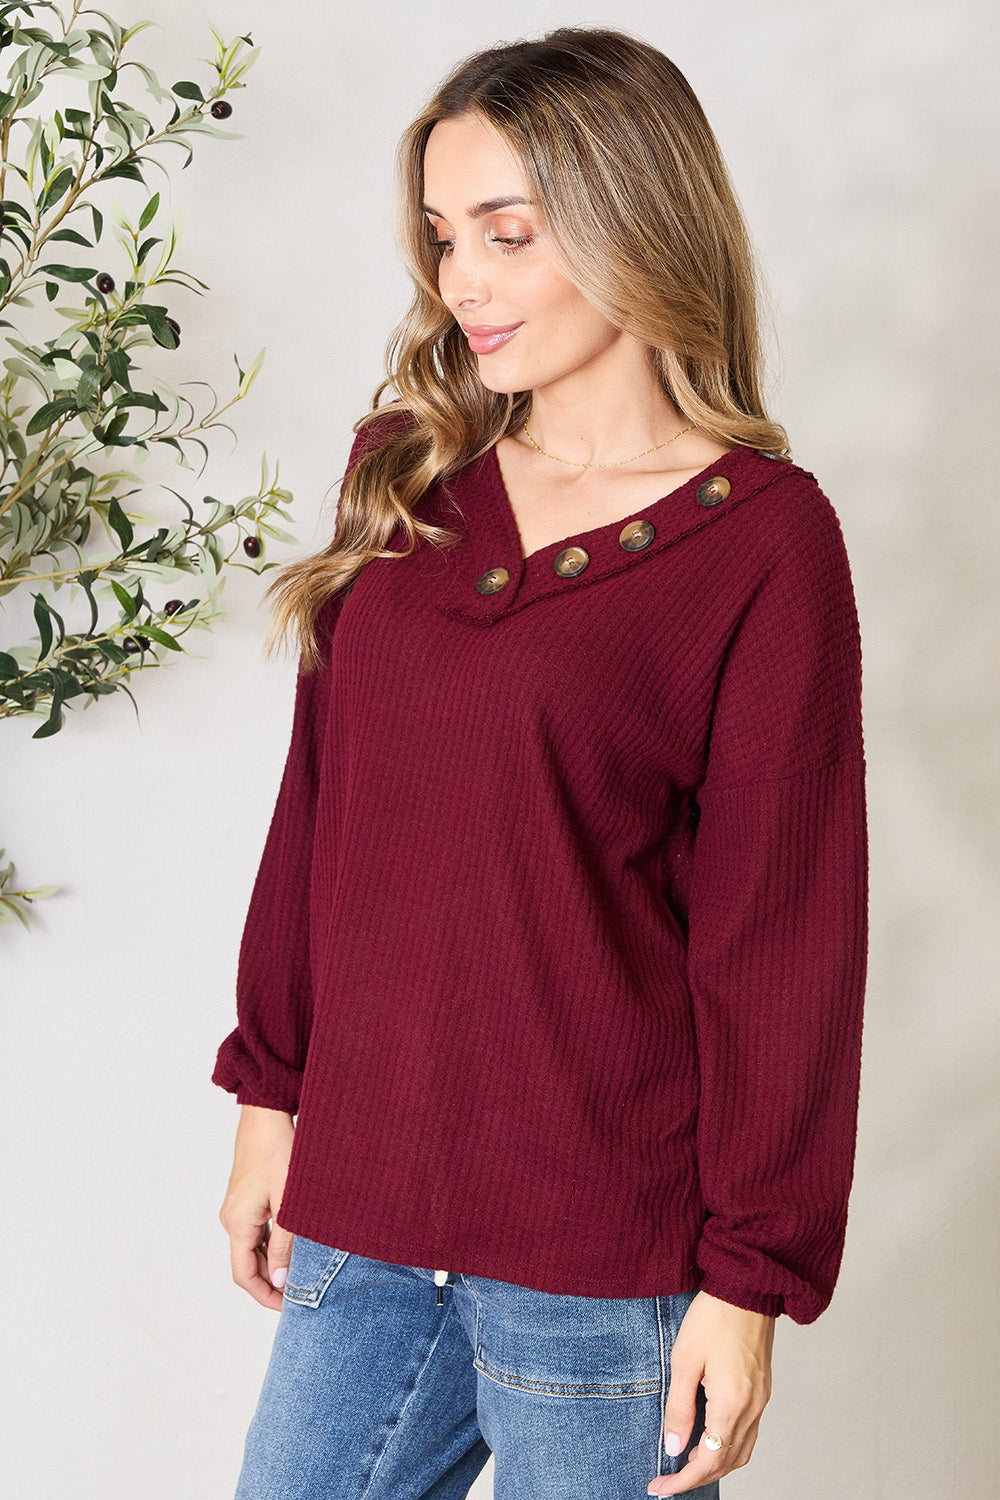 Buttoned V-Neck Long Sleeve Blouse - Women’s Clothing & Accessories - Shirts & Tops - 2 - 2024